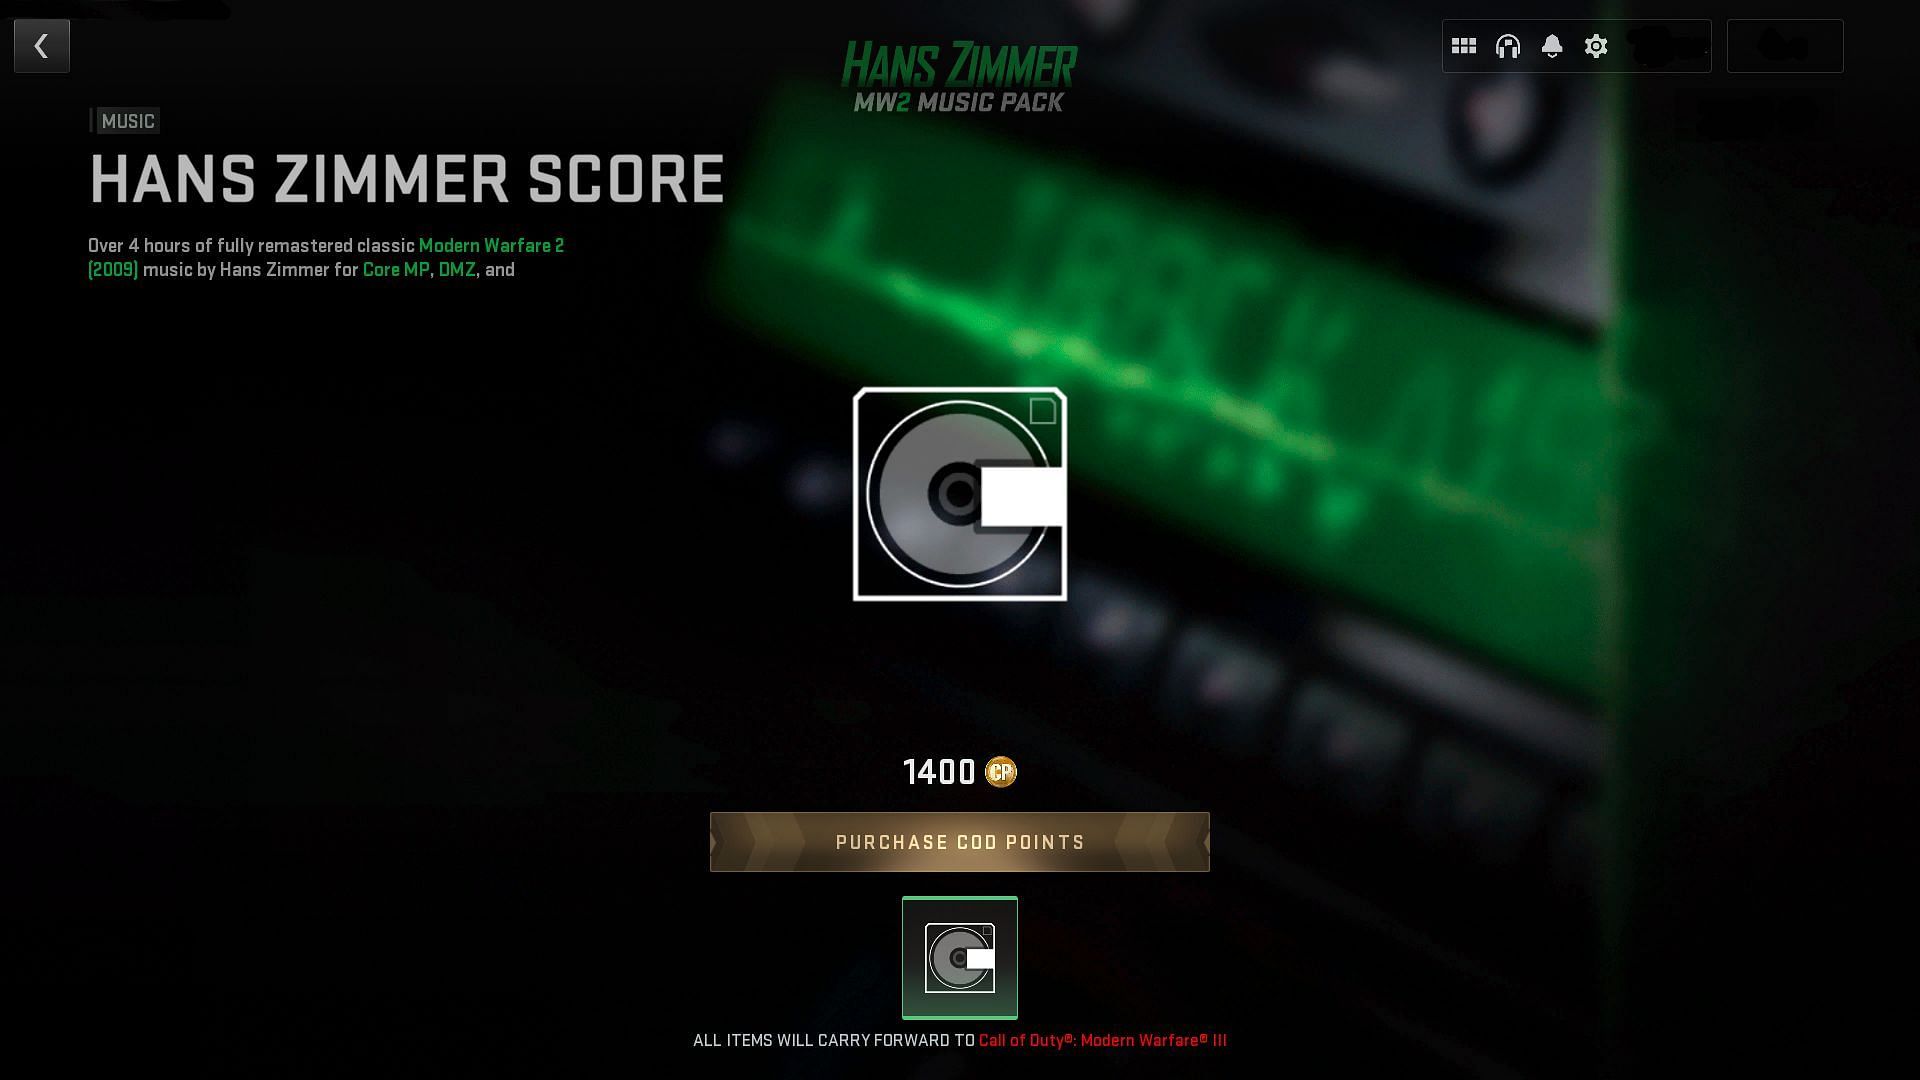 Hans Zimmer MW2 Music Pack purchase screen (Image via Activision)